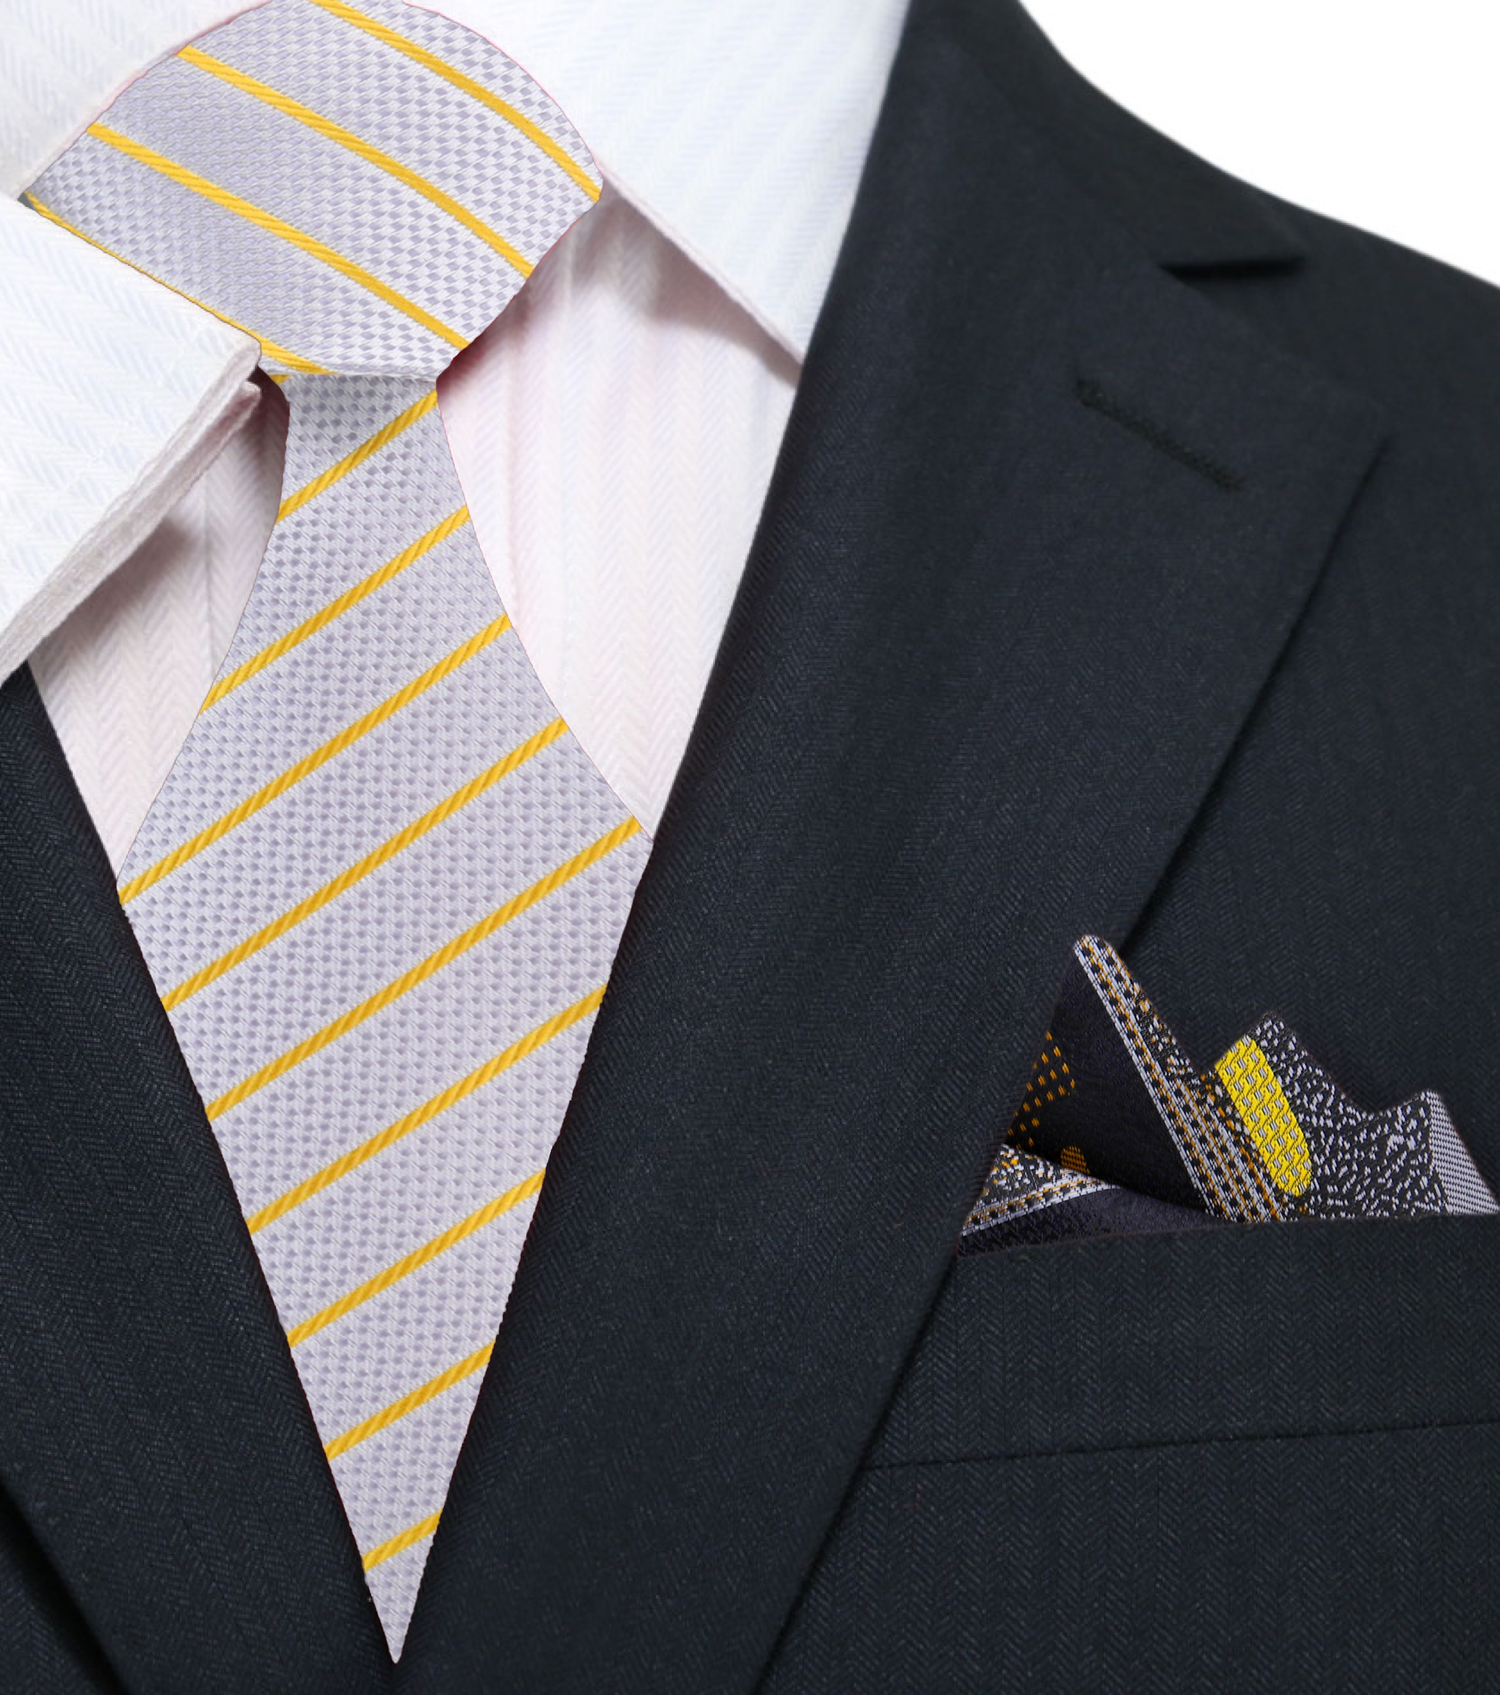 Silver and Gold Pinstripe Necktie and Abstract Square